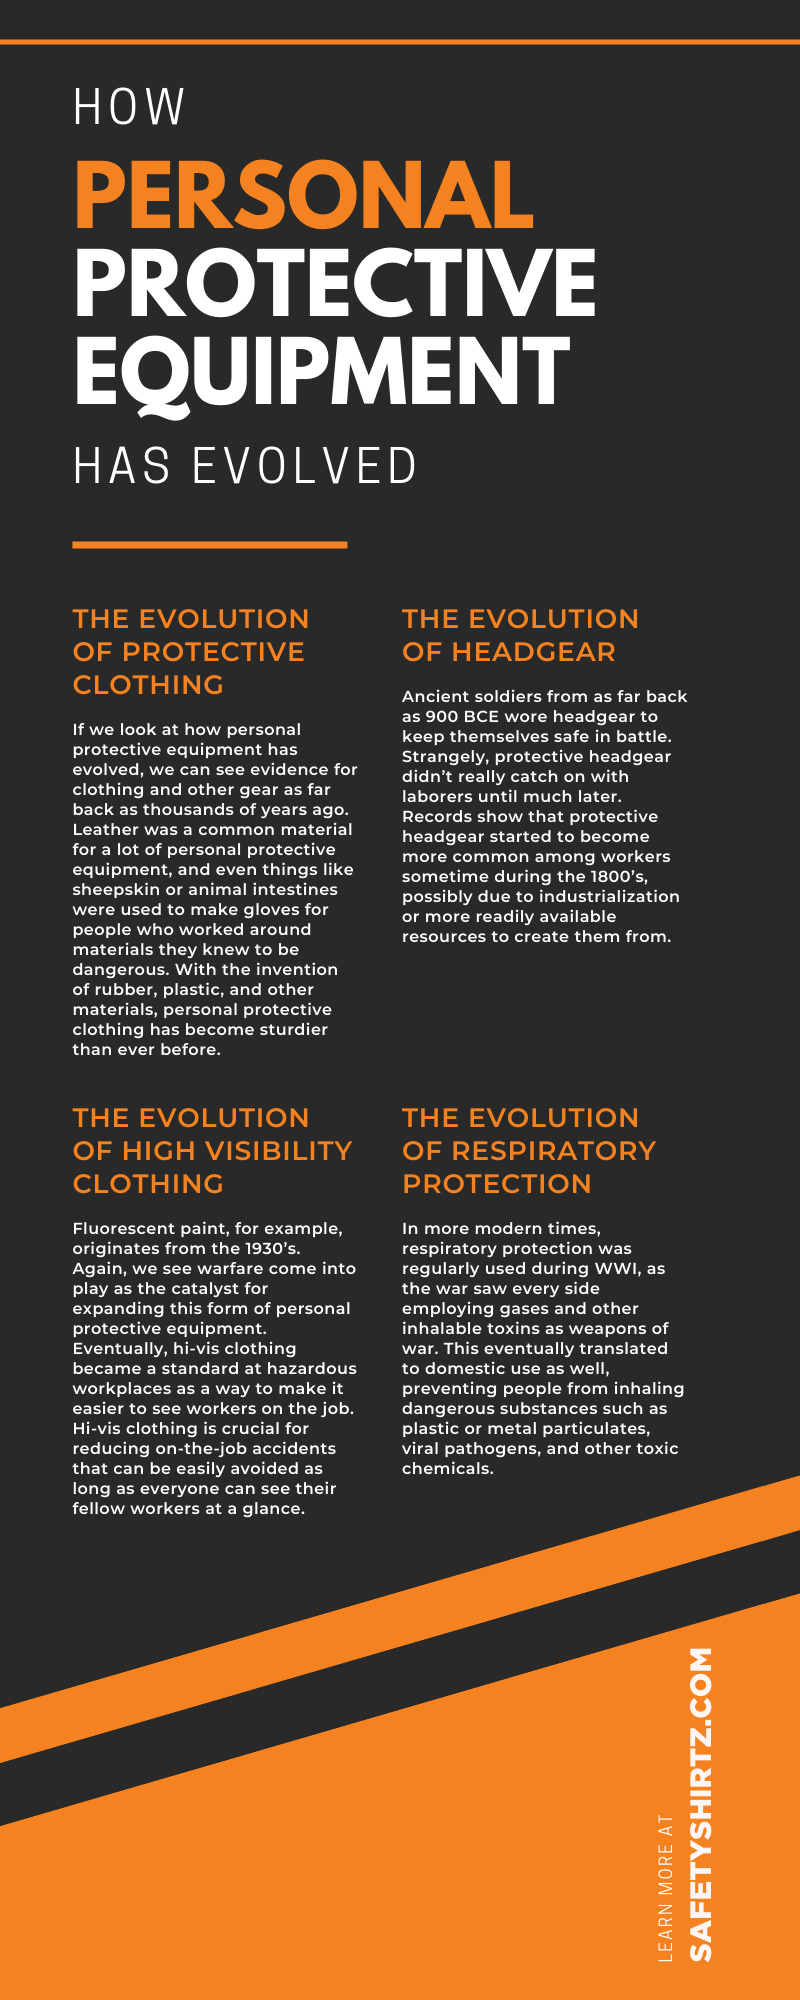 How Personal Protective Equipment Has Evolved